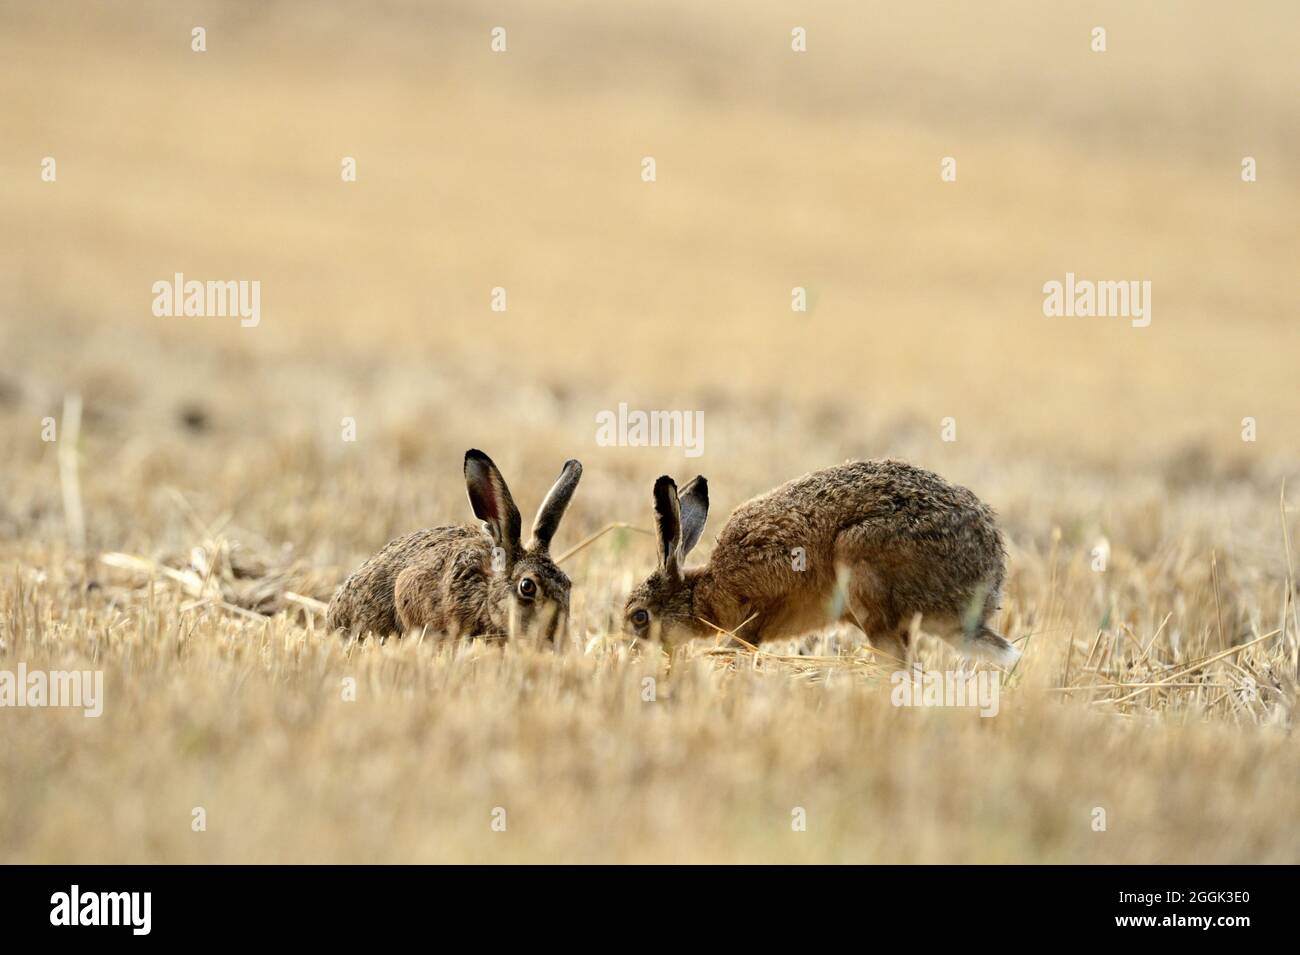 Hare, brown hare Stock Photo